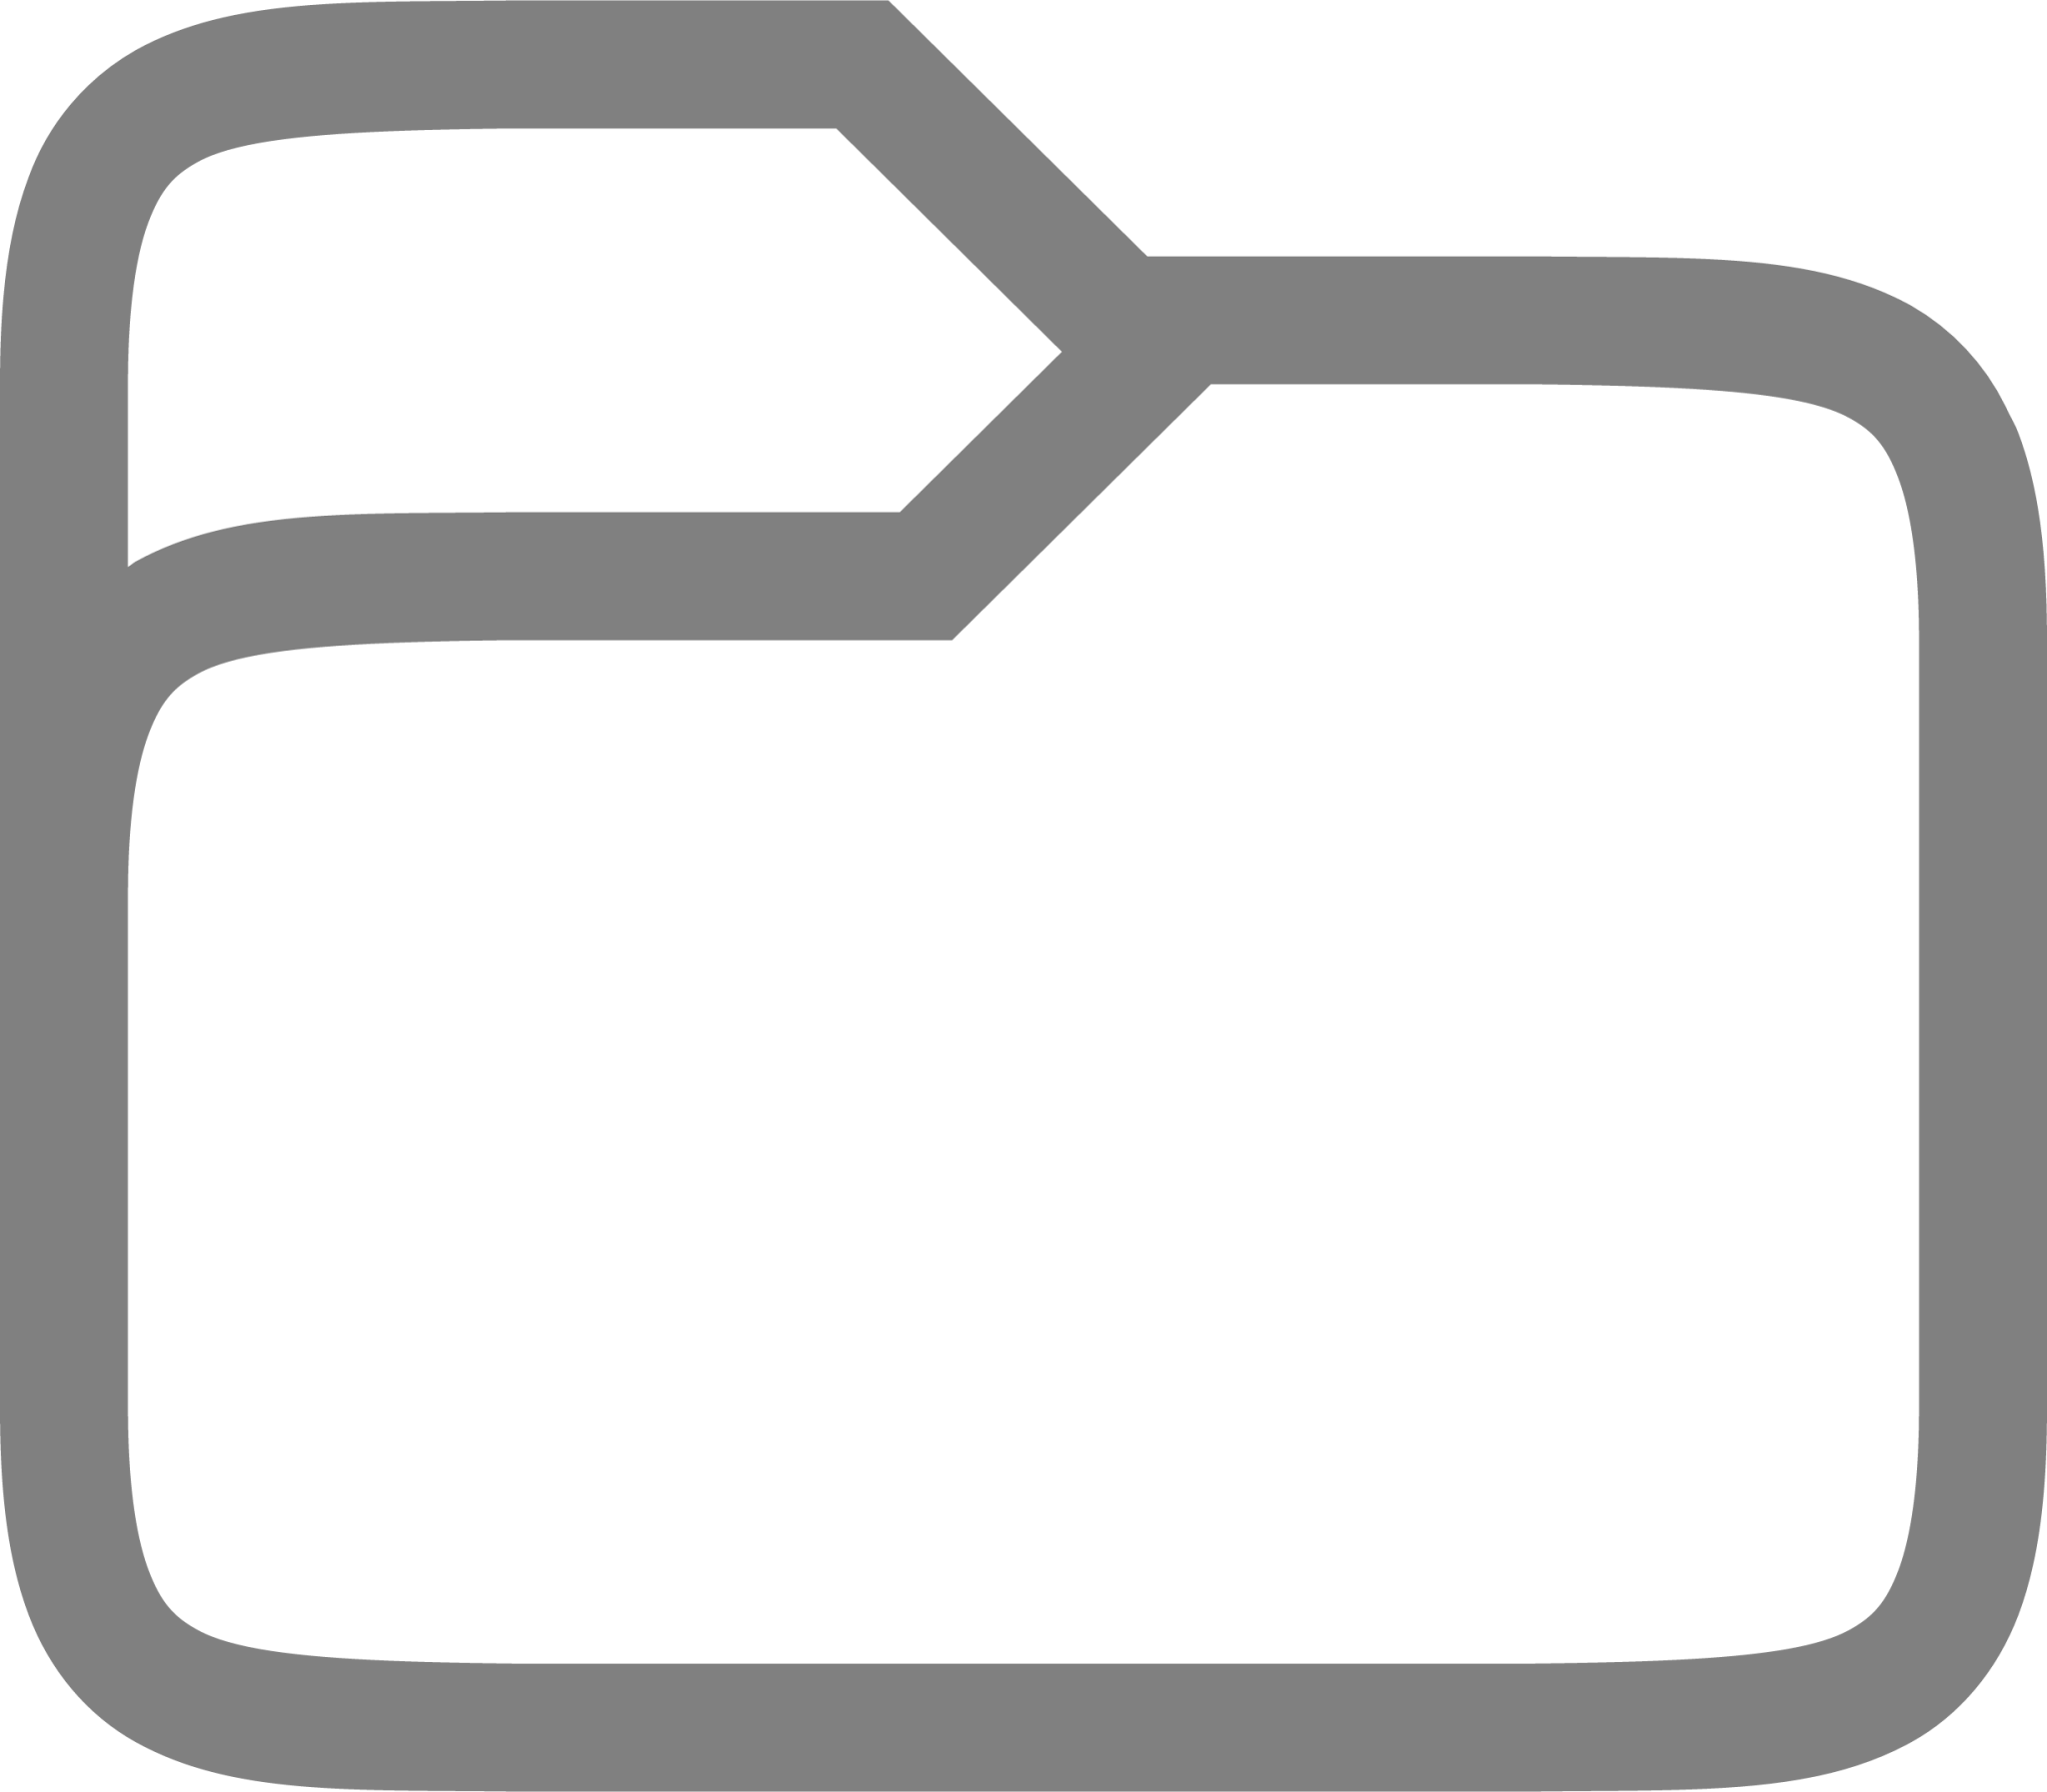 system file manager symbolic icon